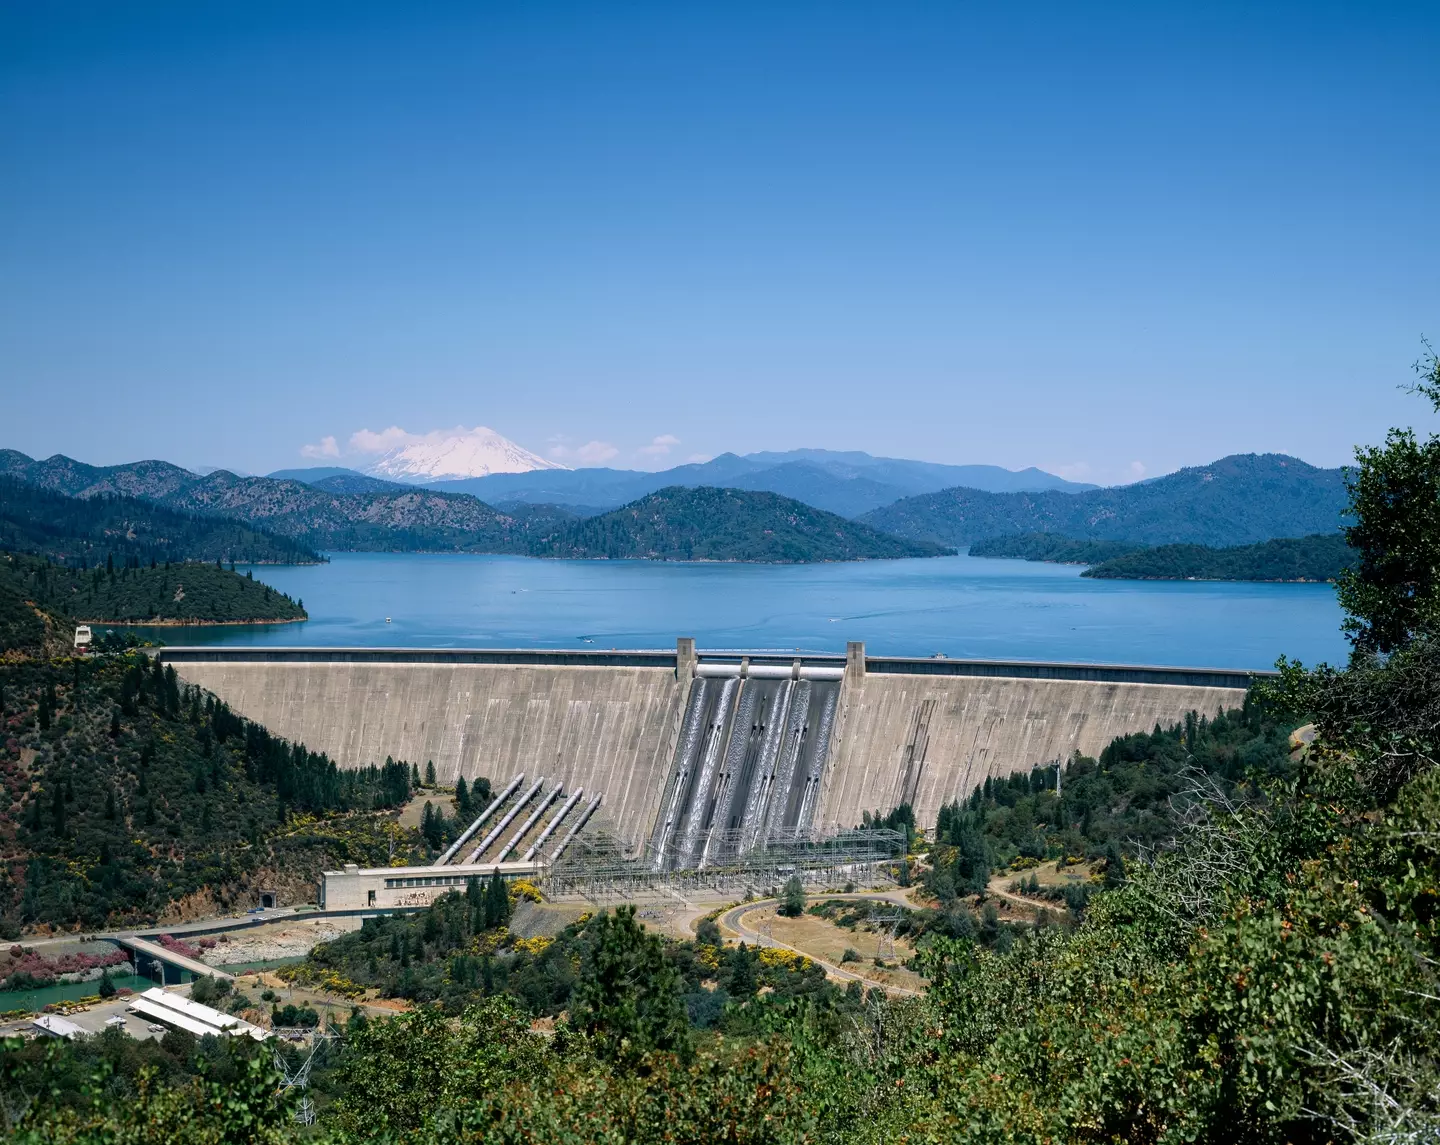 Communities were displaced to build the Fontana Dam.